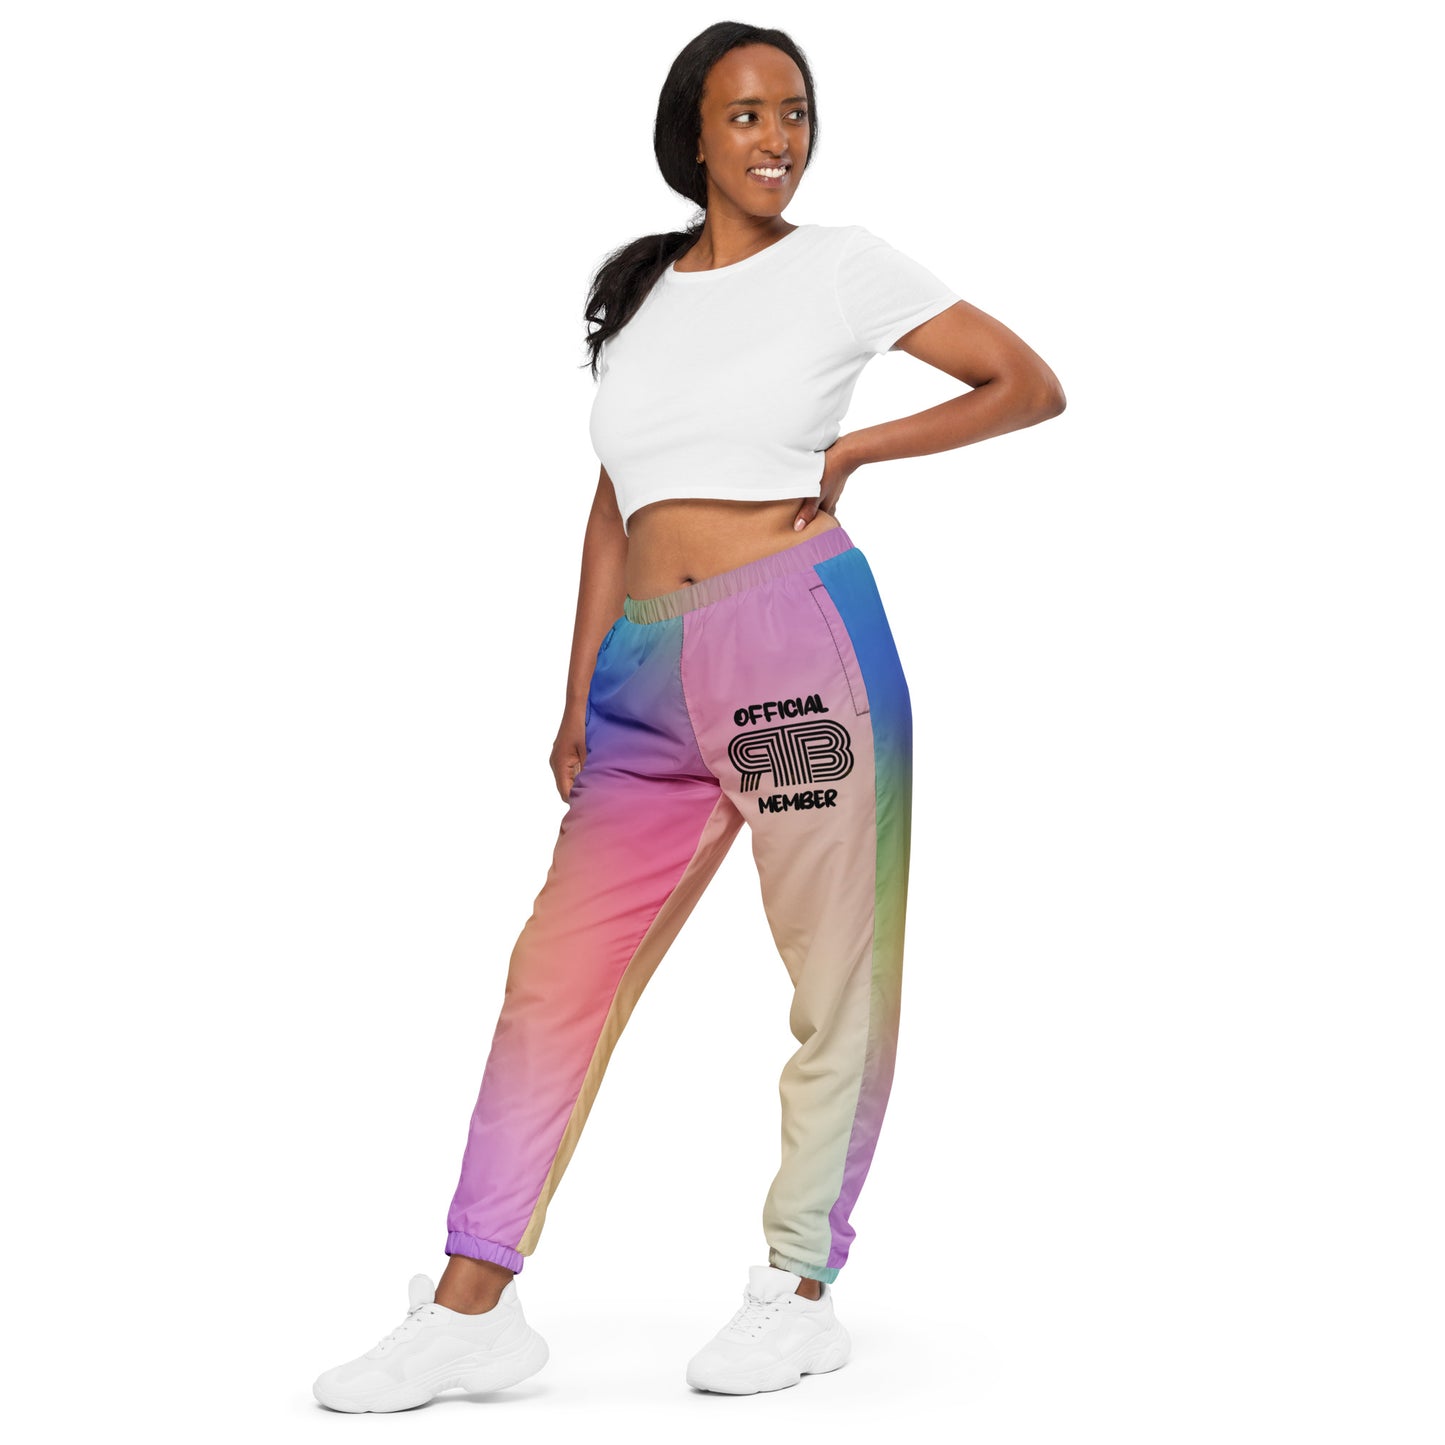 Official Members Candy Track Pants (Women's)